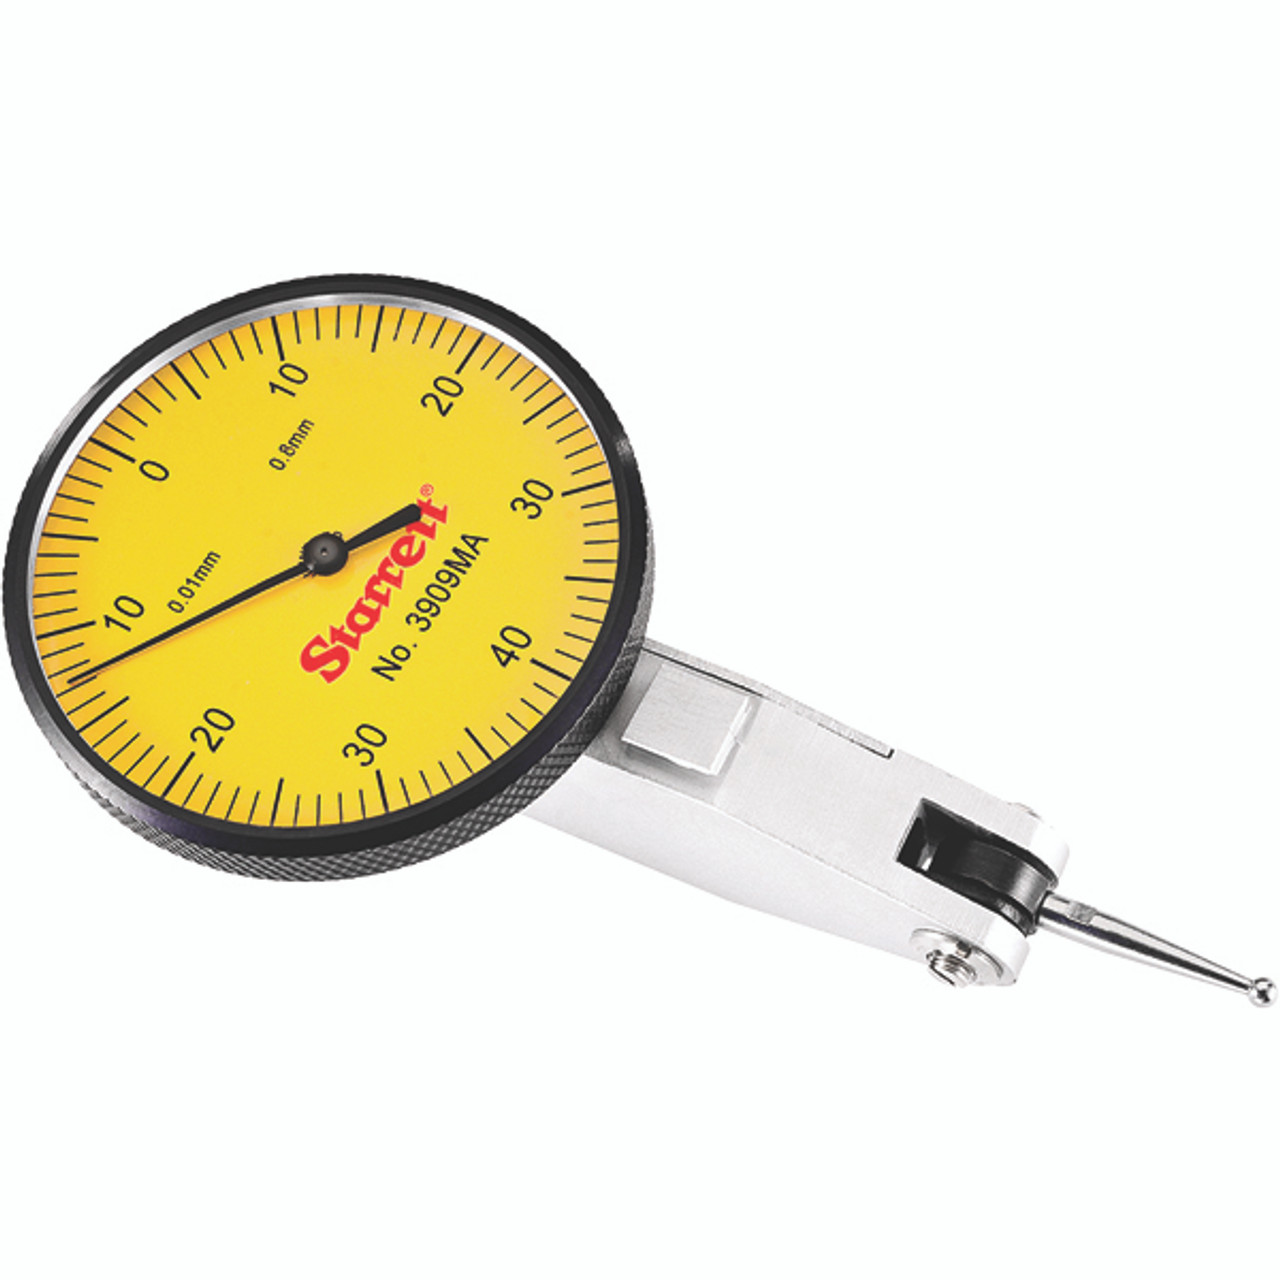 0.01mm Graduation Starrett 3909MA Dial Test Indicator with Dovetail Mount and 2 Attachments 0.8mm Range 40mm Yellow Dial 